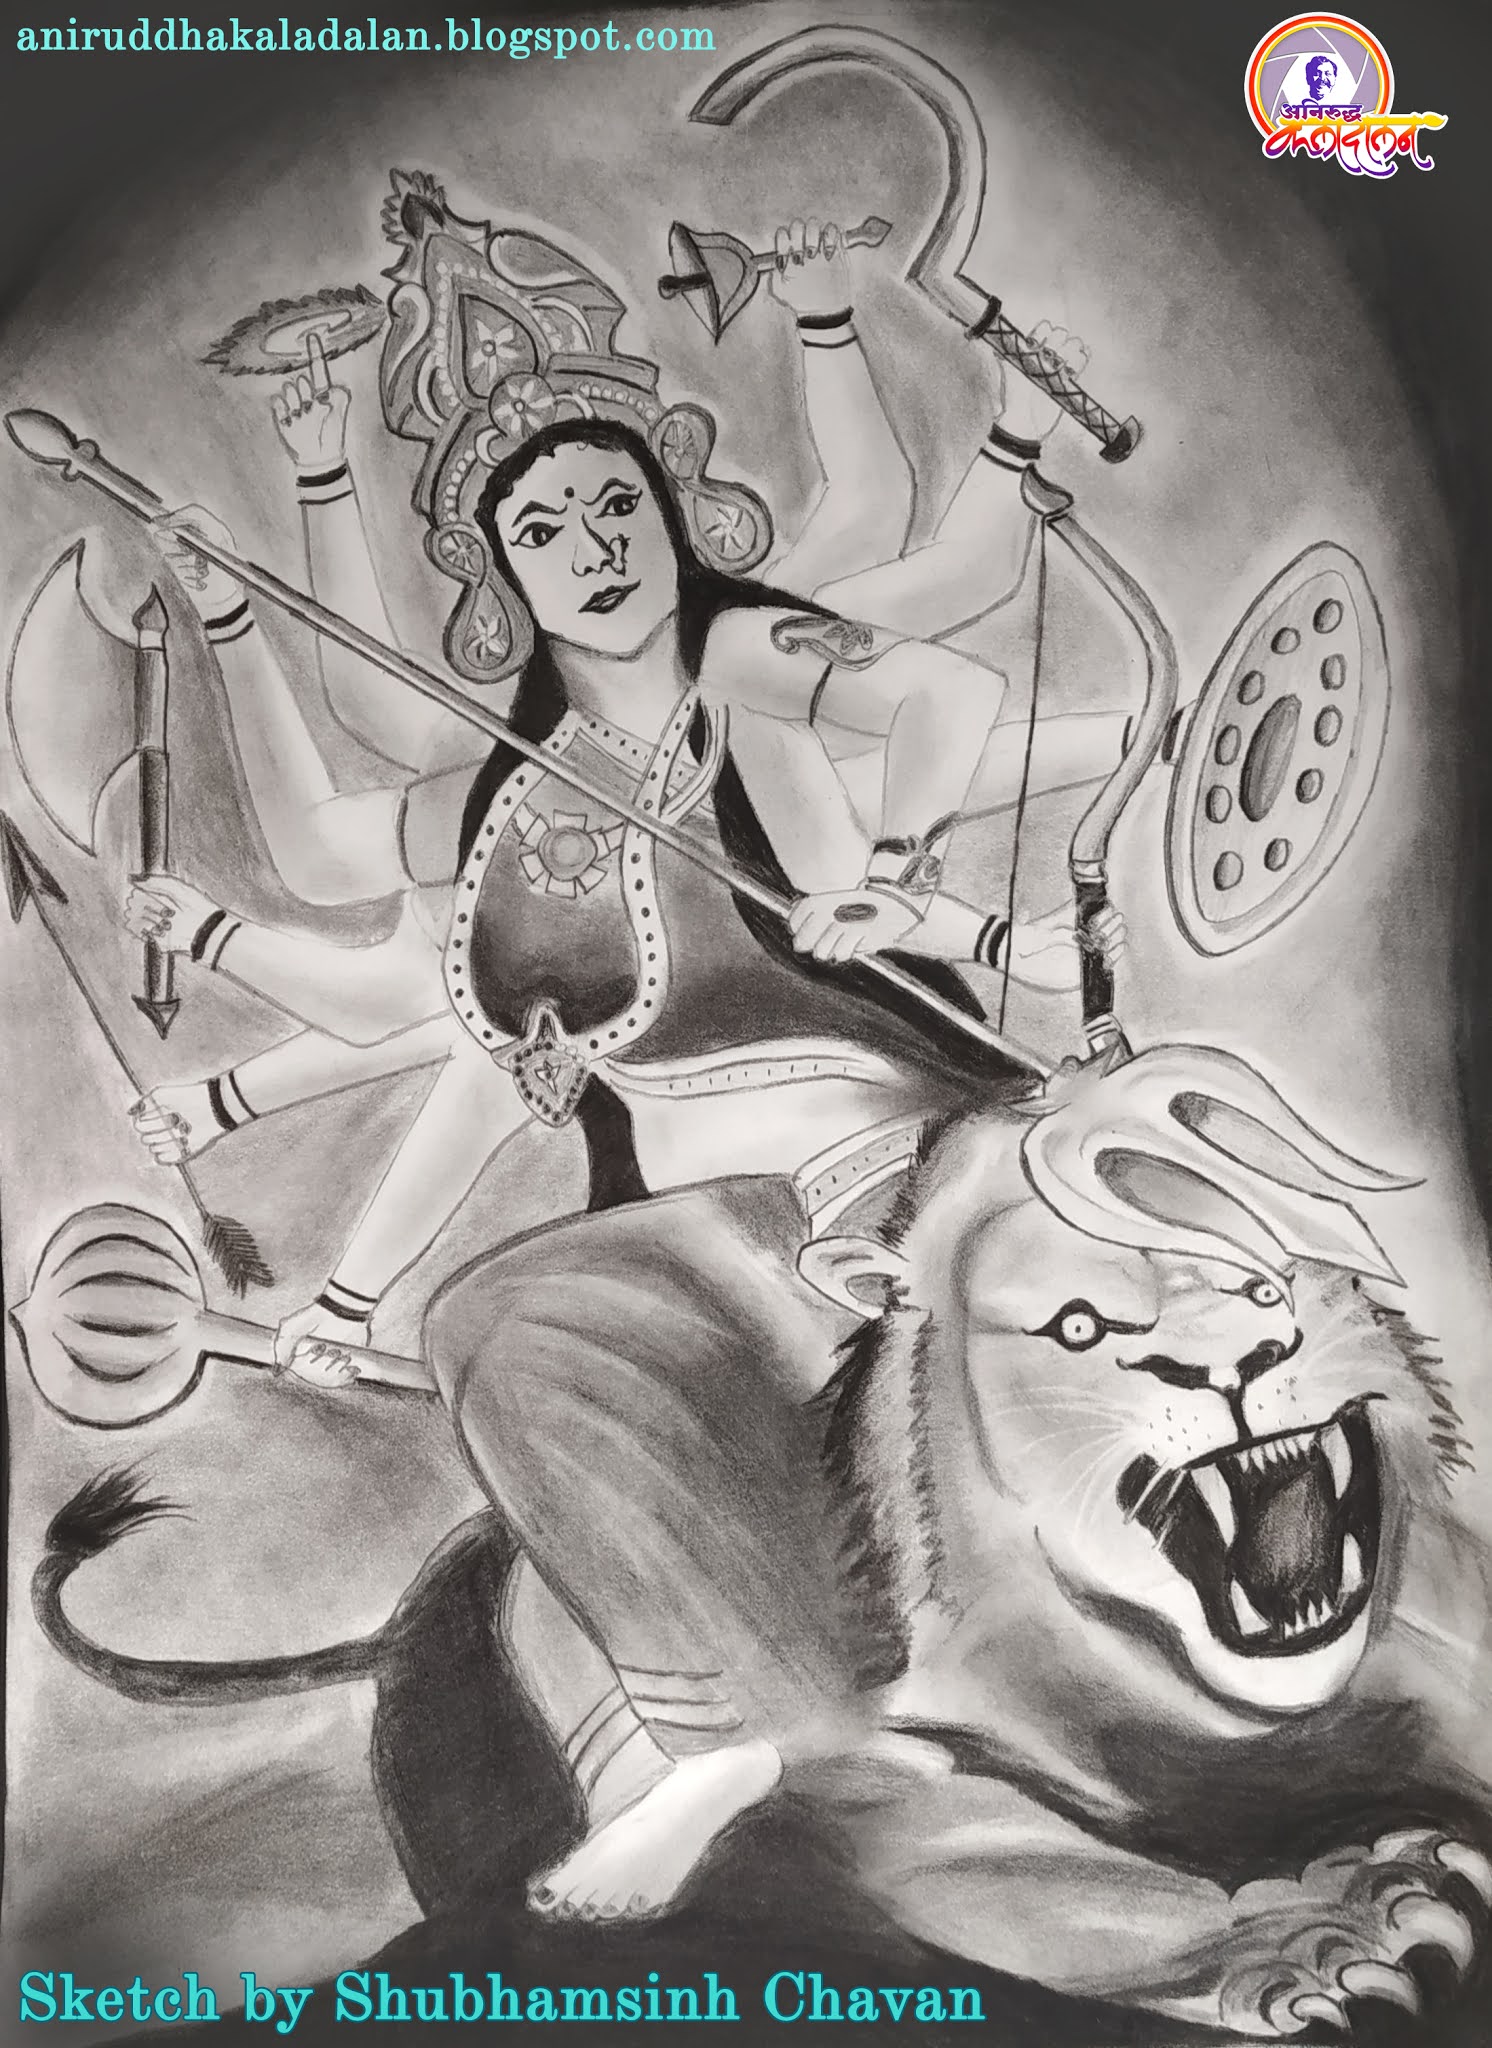 Discover more than 156 sketch durga maa drawing latest